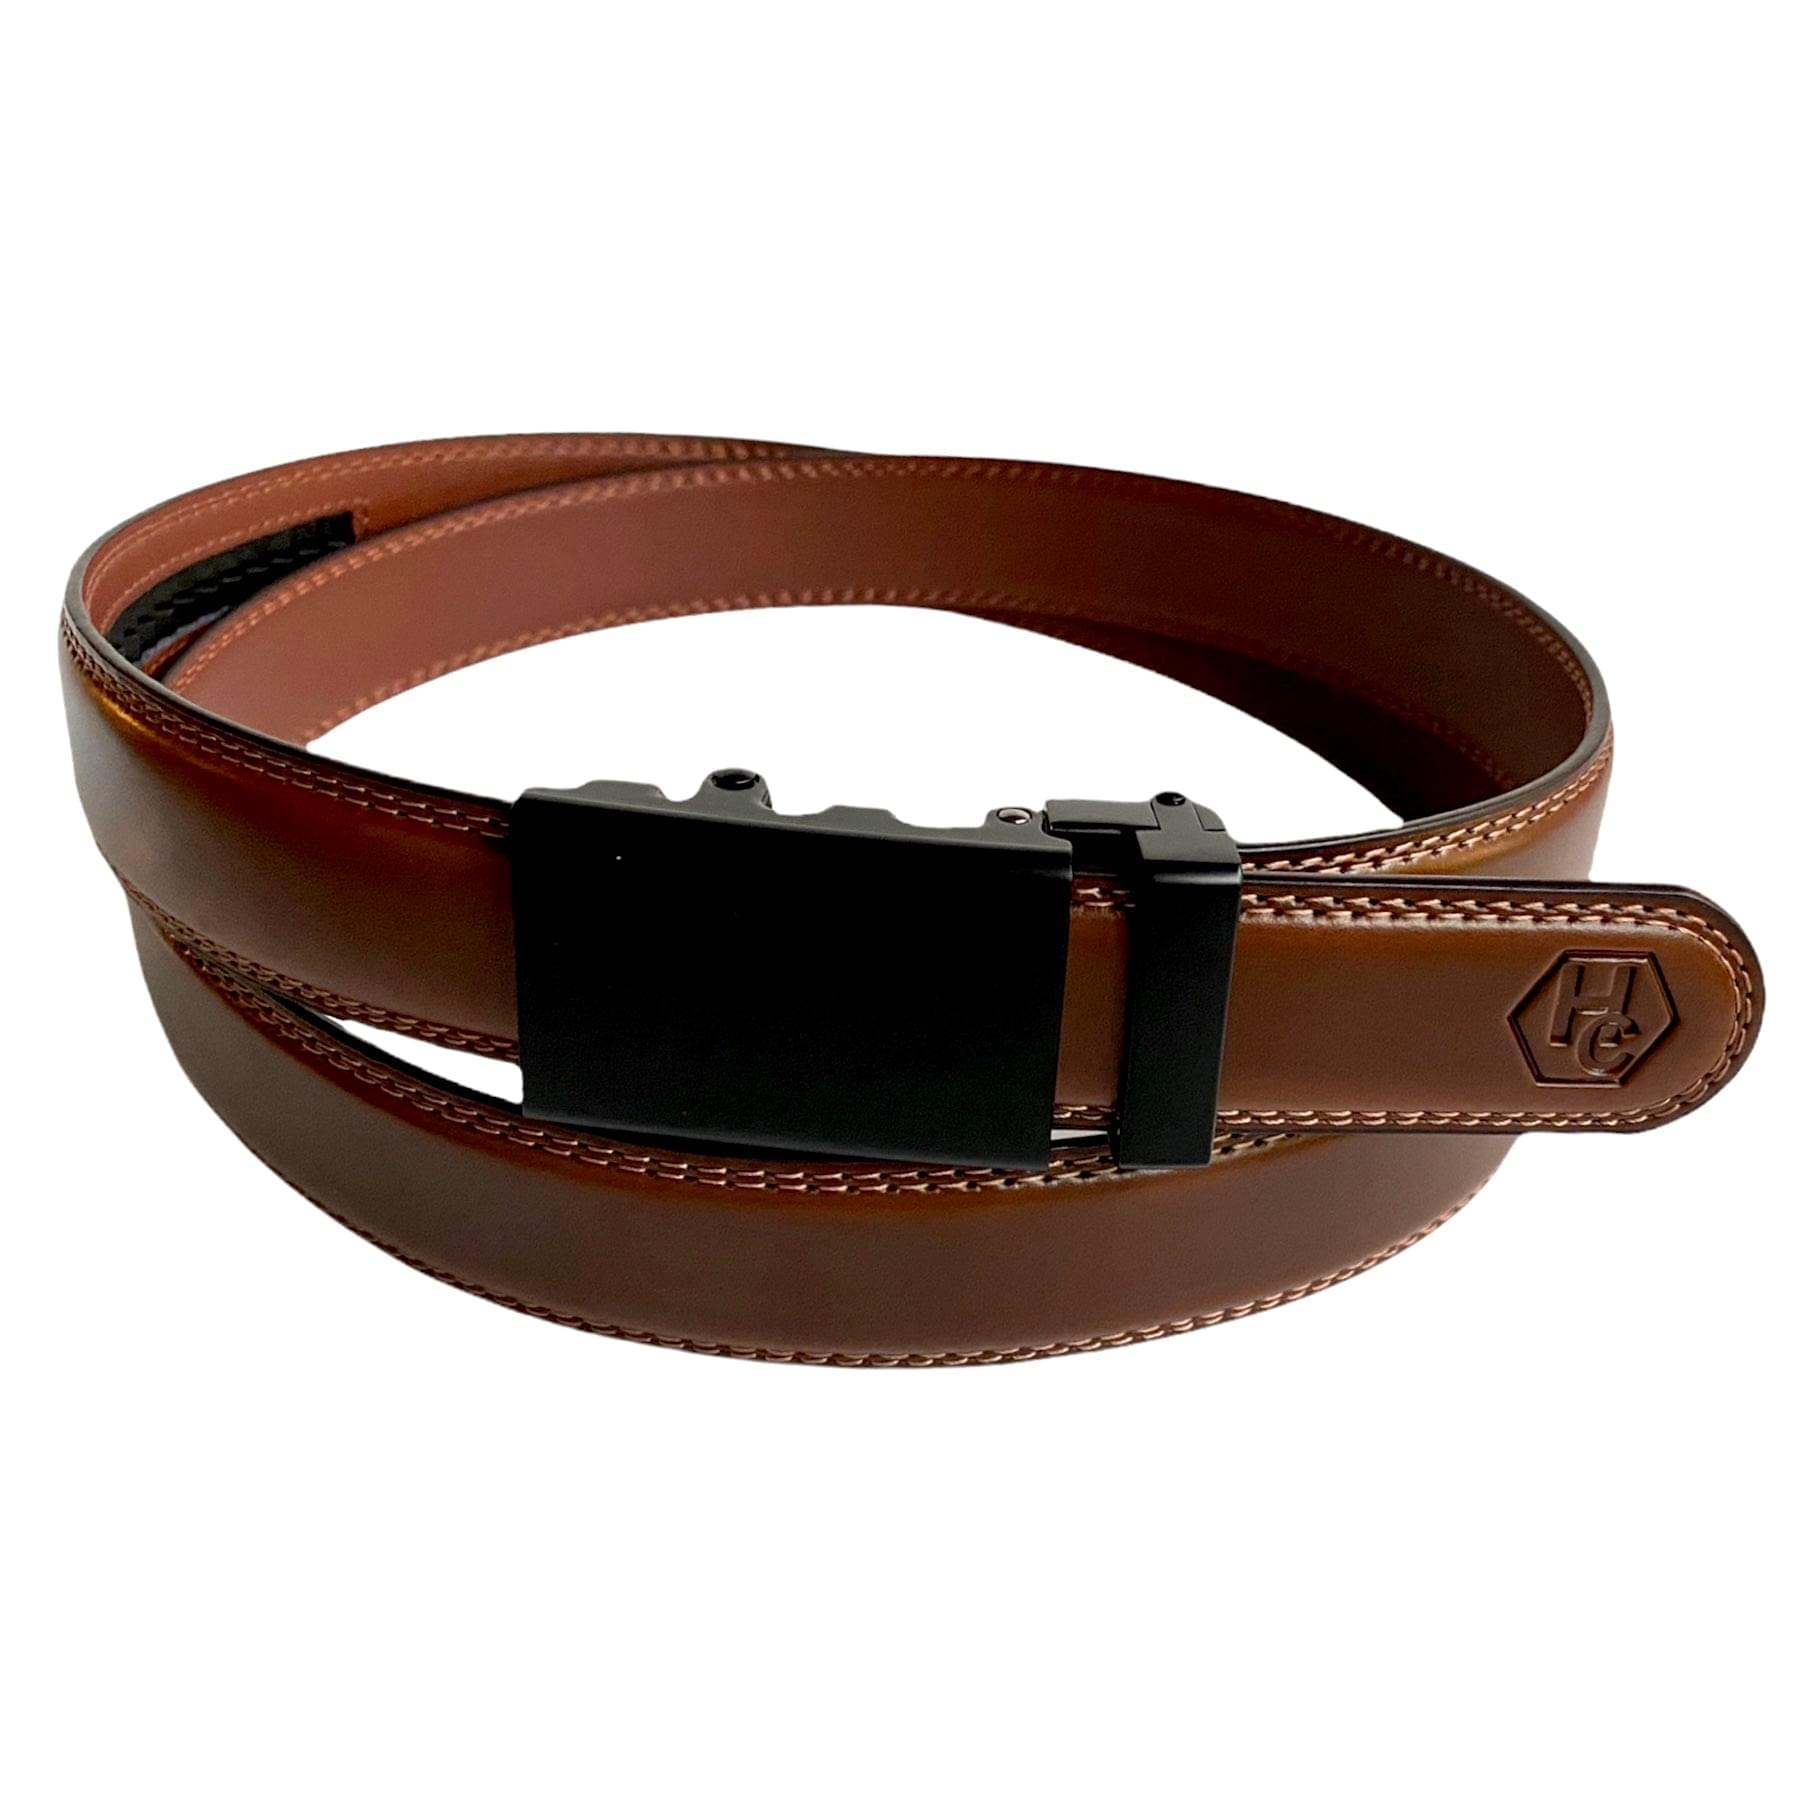 1.15" Genuine Leather Brown Strap And 1.15" Automatic Buckle Black Folded Edges 31837644816535